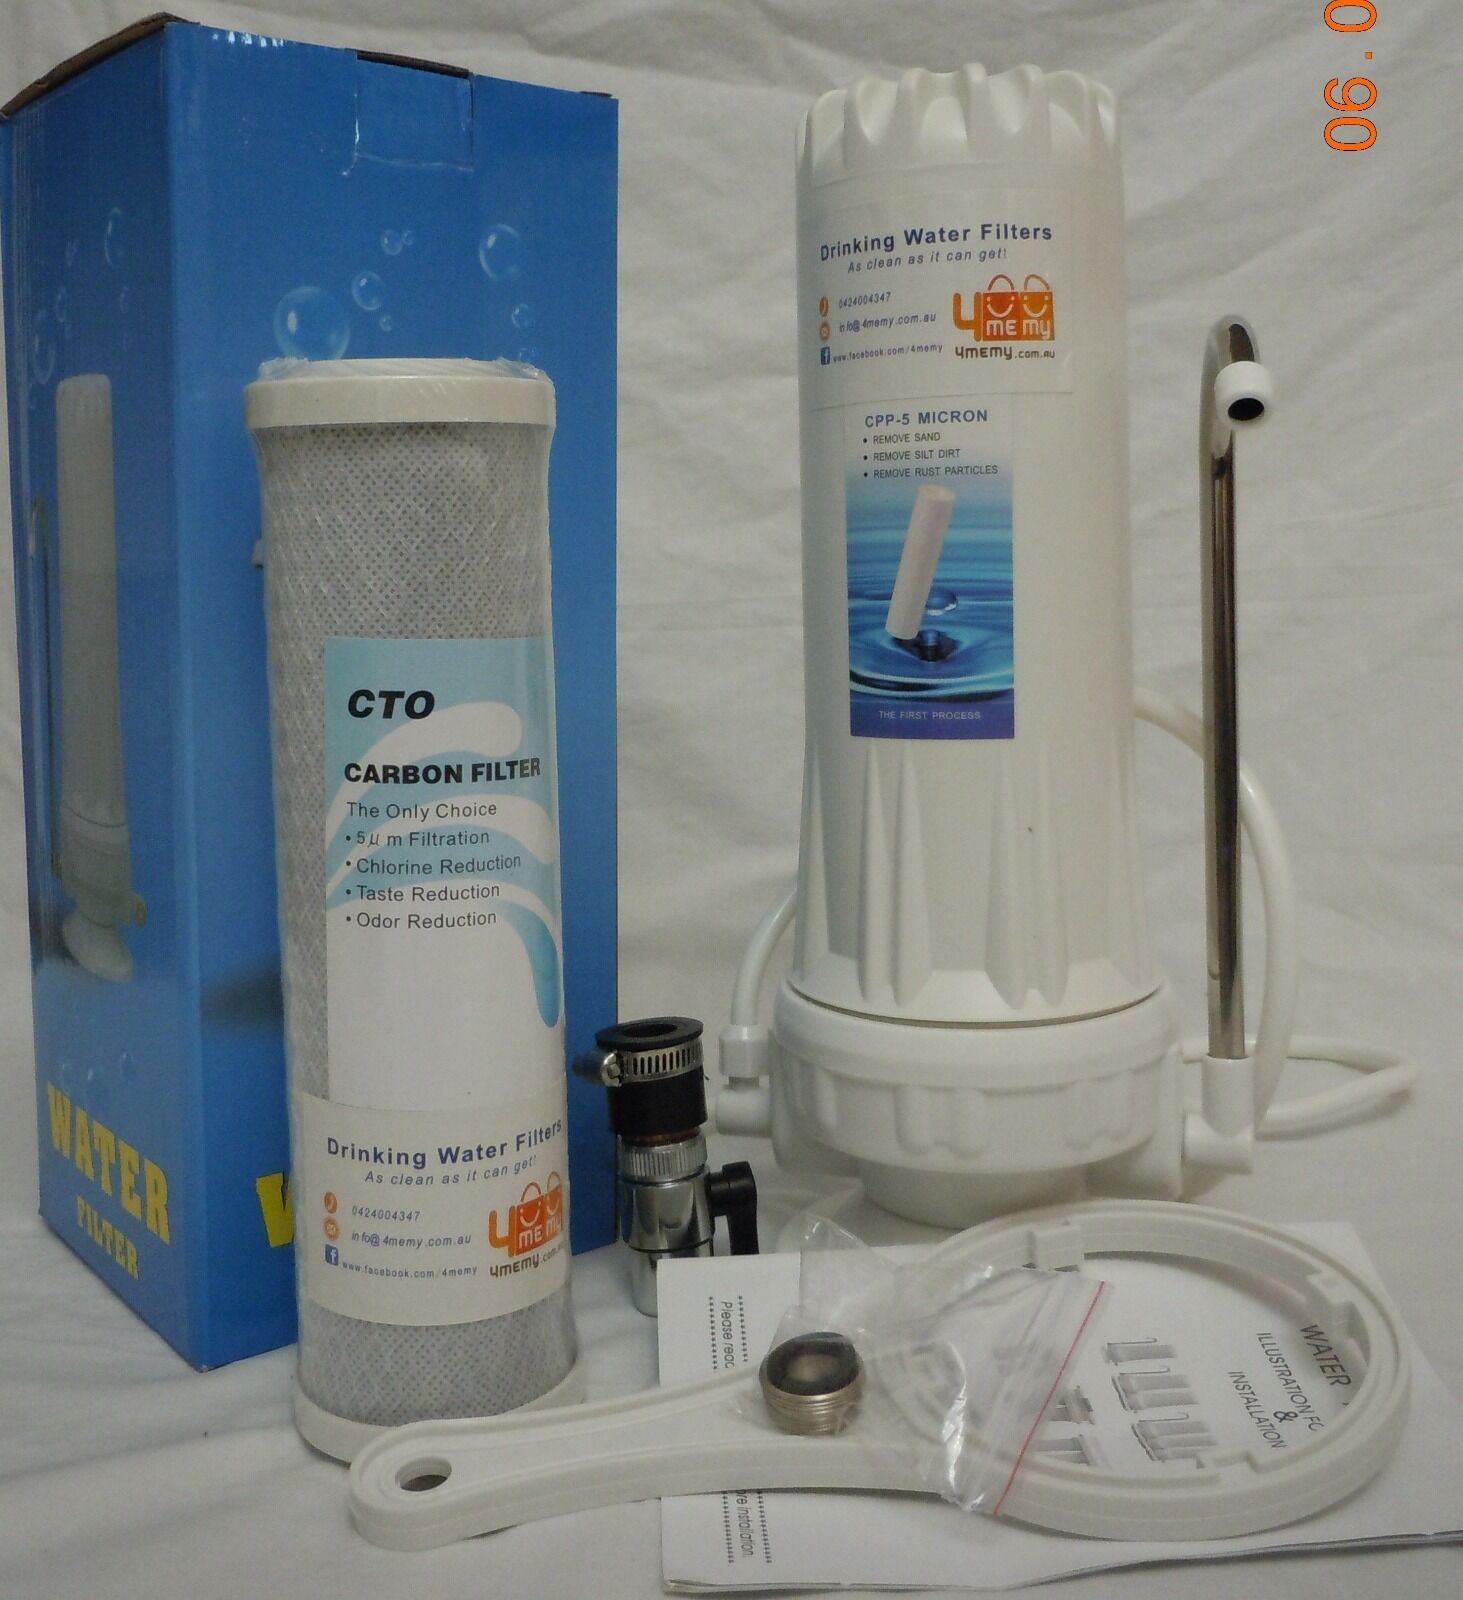 carbon filter cartridge and single counter water filter